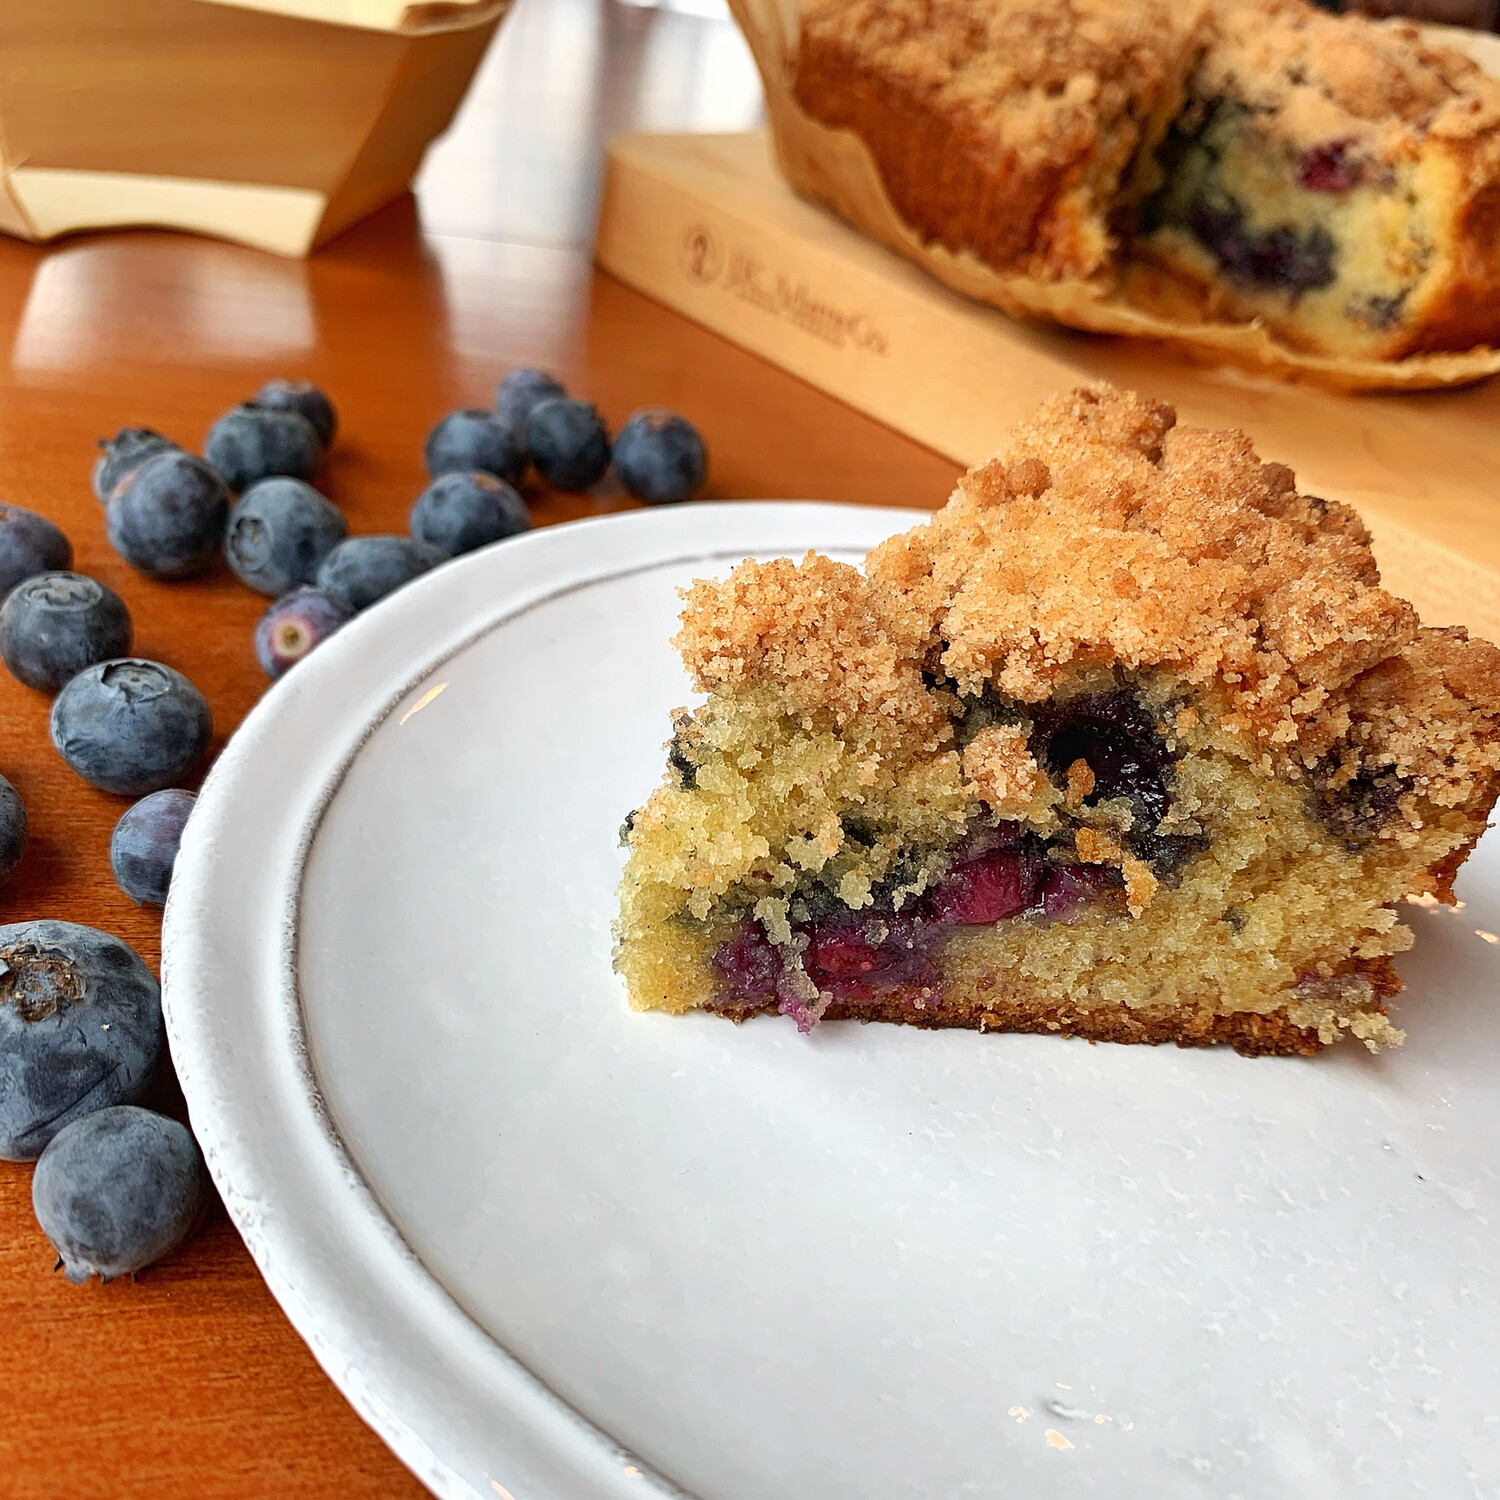 EASTER 23 coffee cake: BLUEBERRY BAKE-AT-HOME